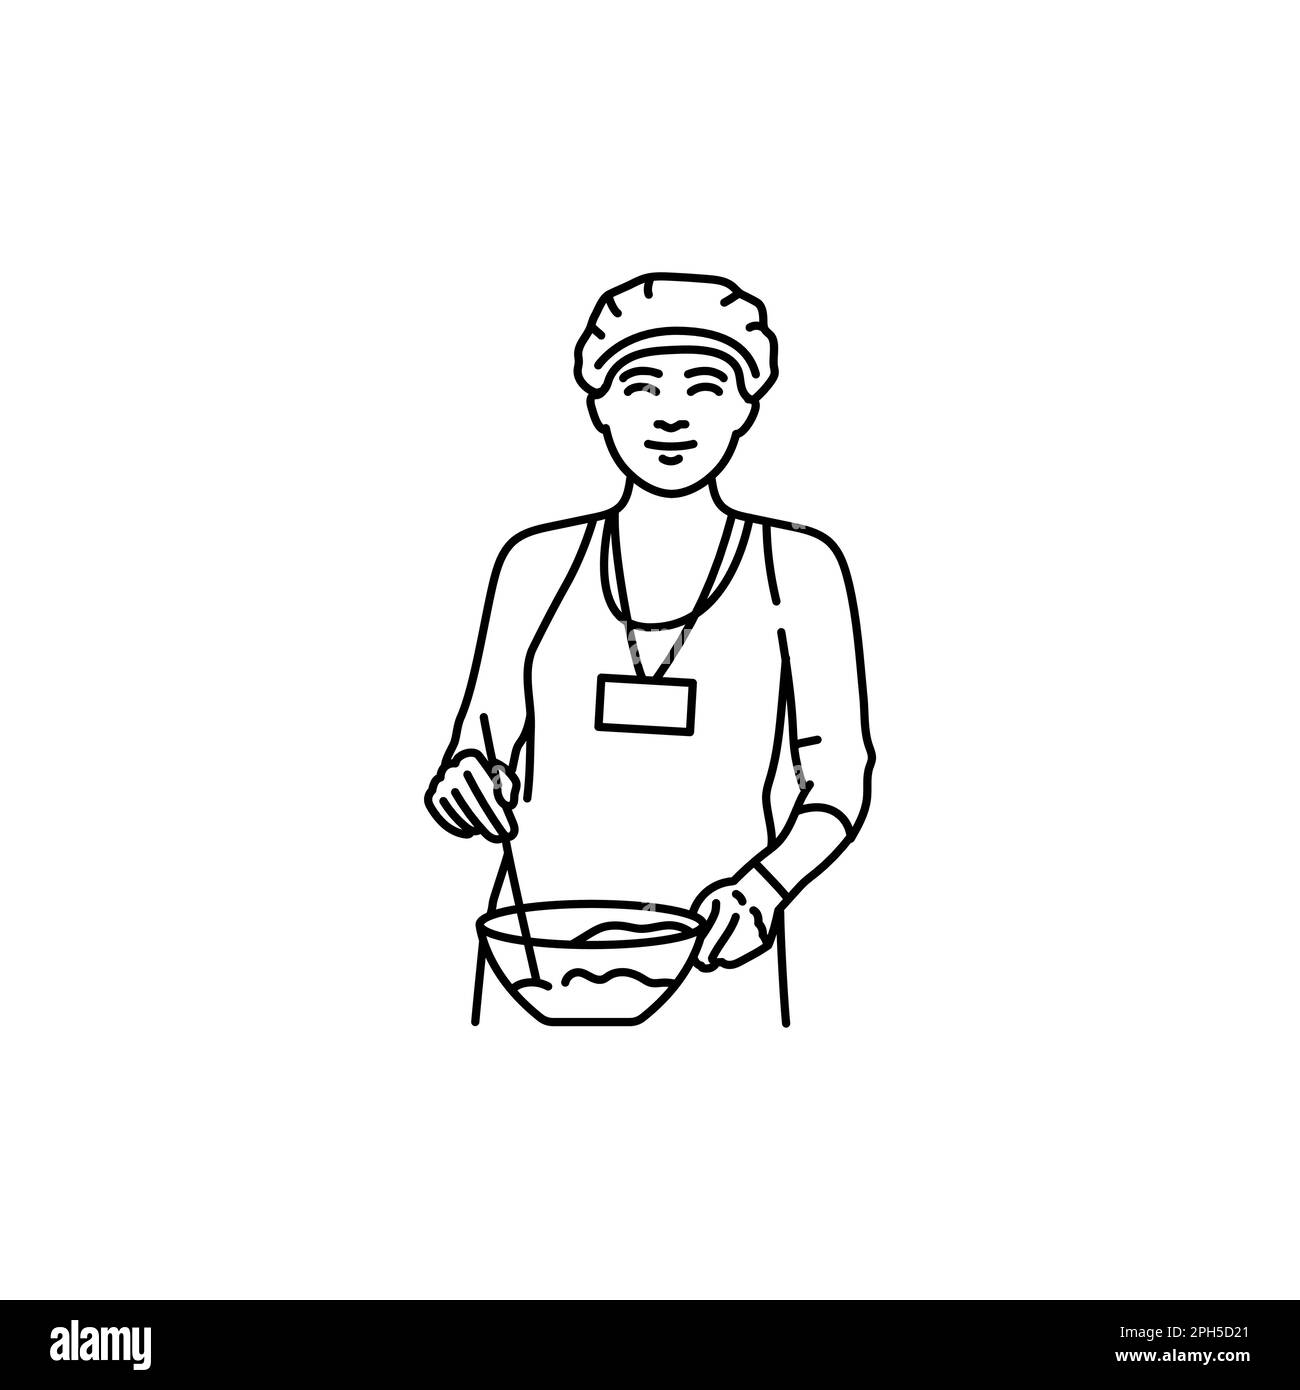 Volunteer cook black line icon. Pictogram for web page, mobile app, promo. Stock Vector